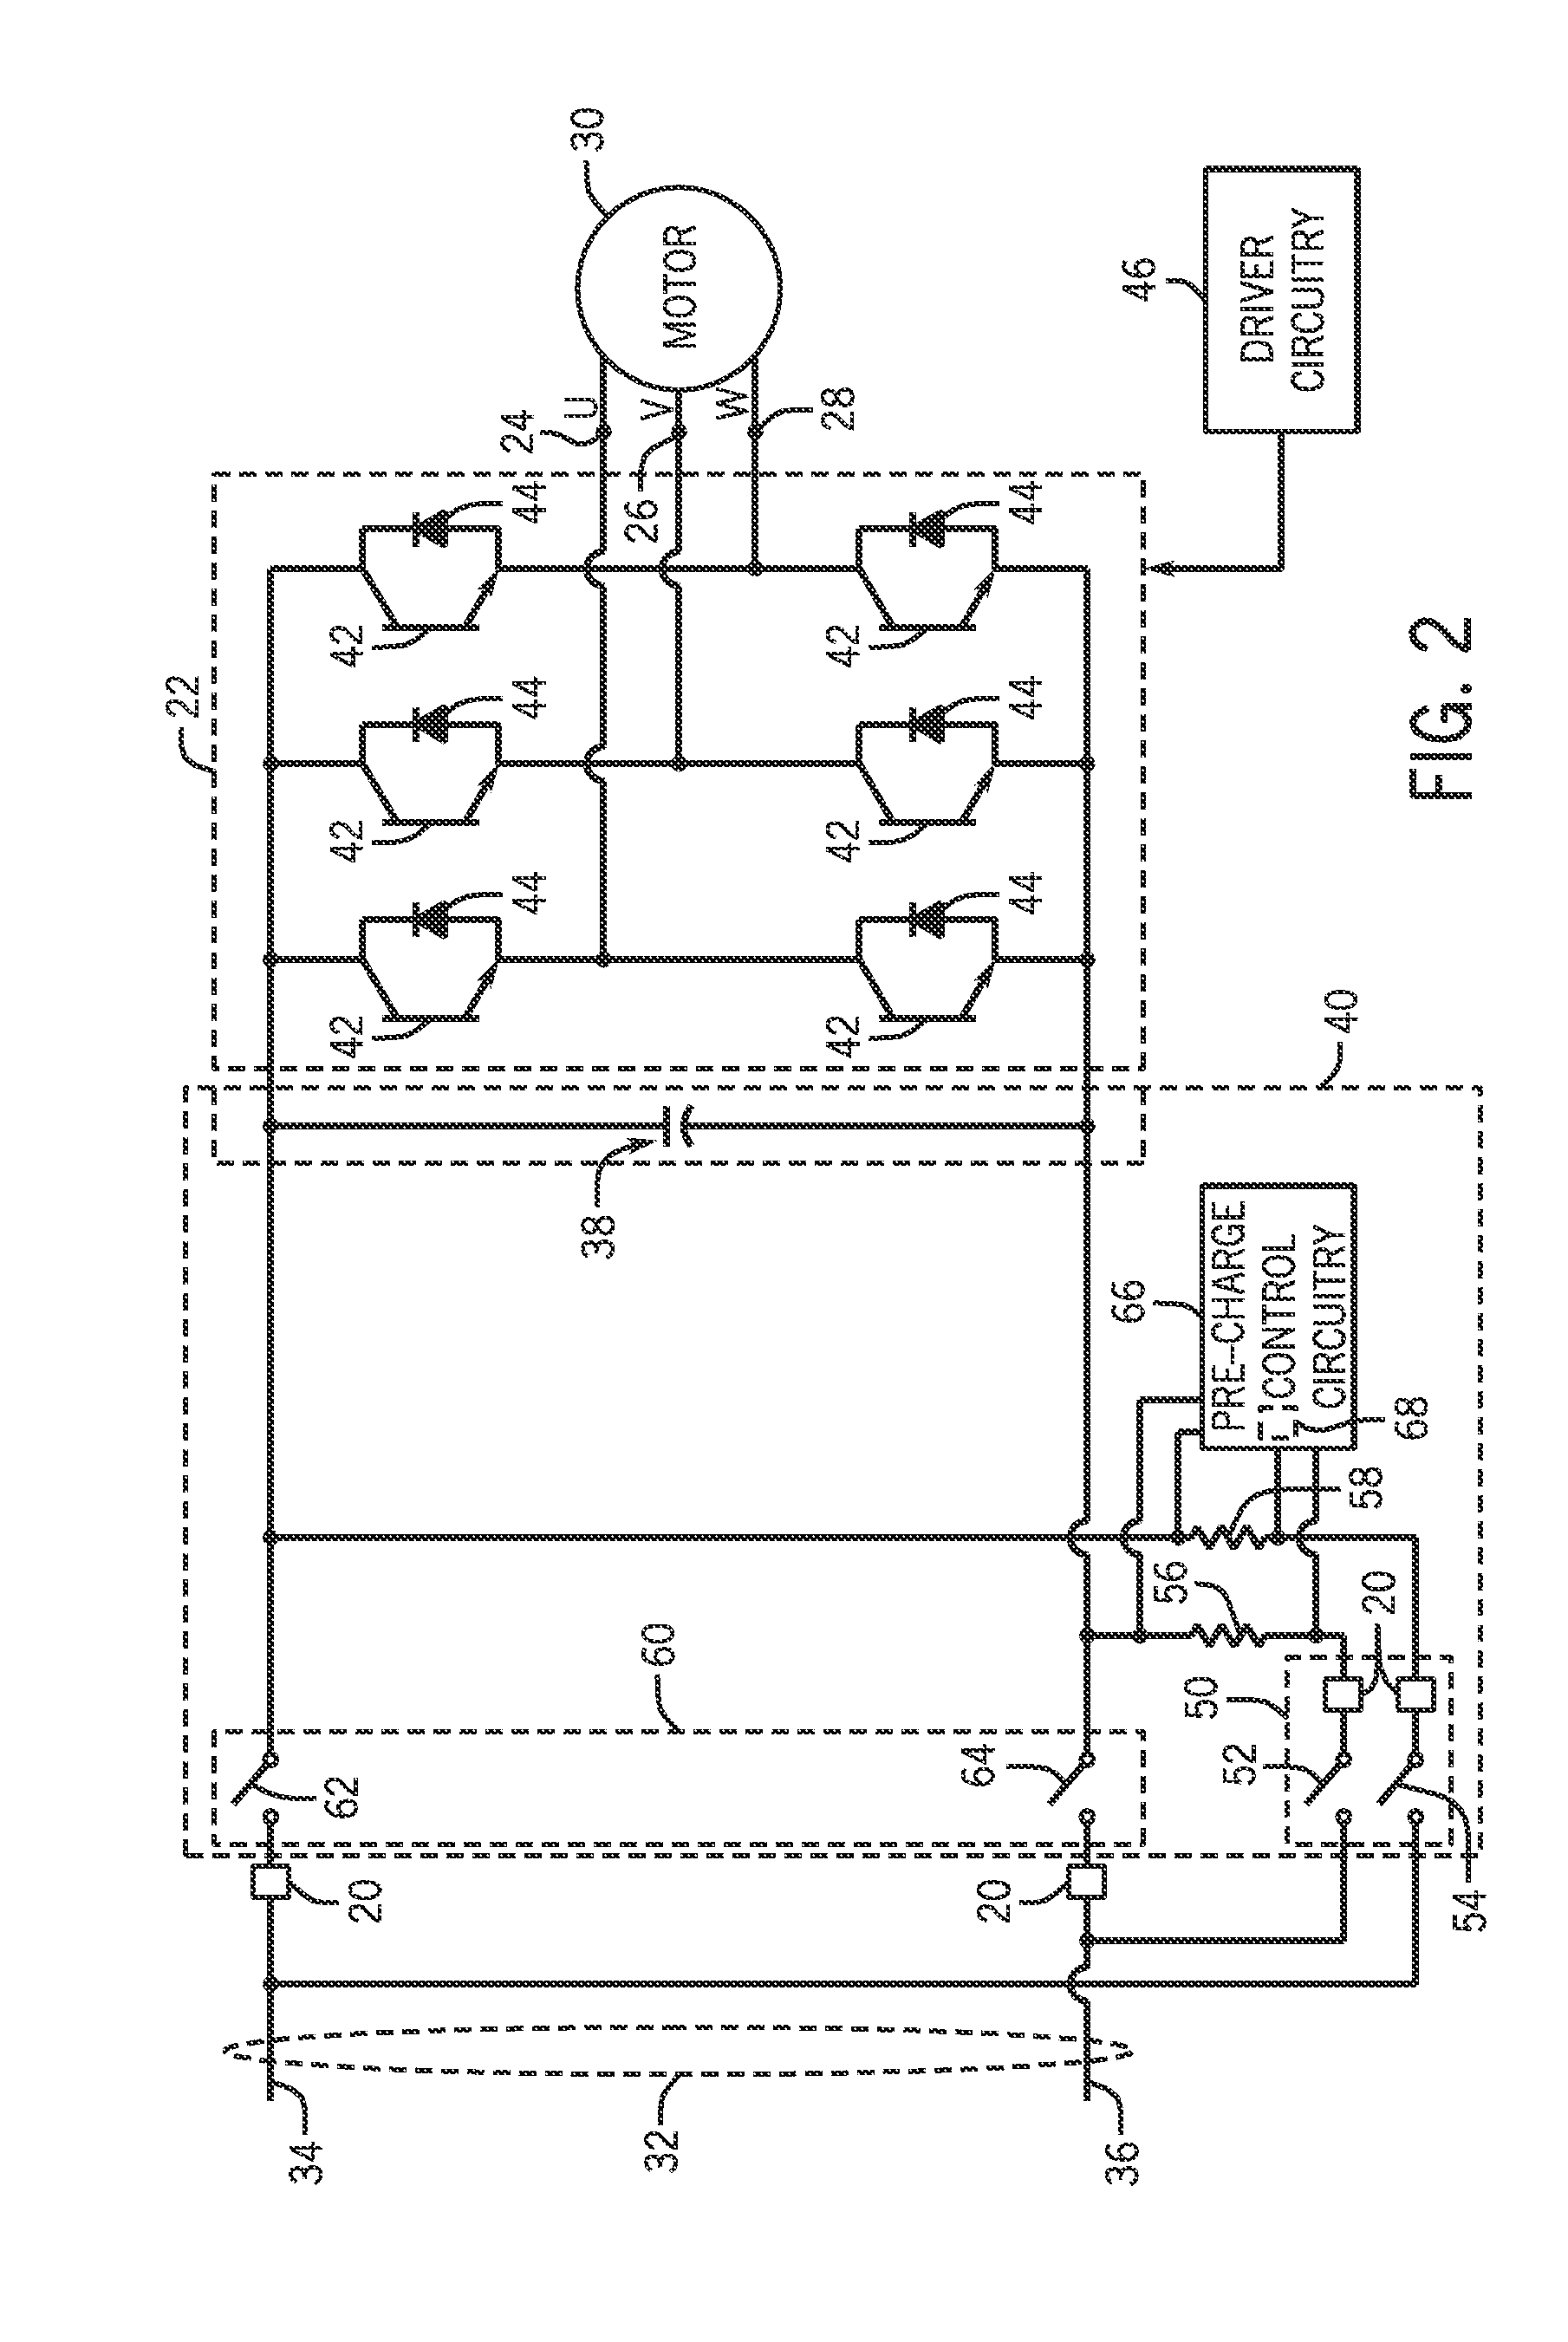 DC pre-charge circuit